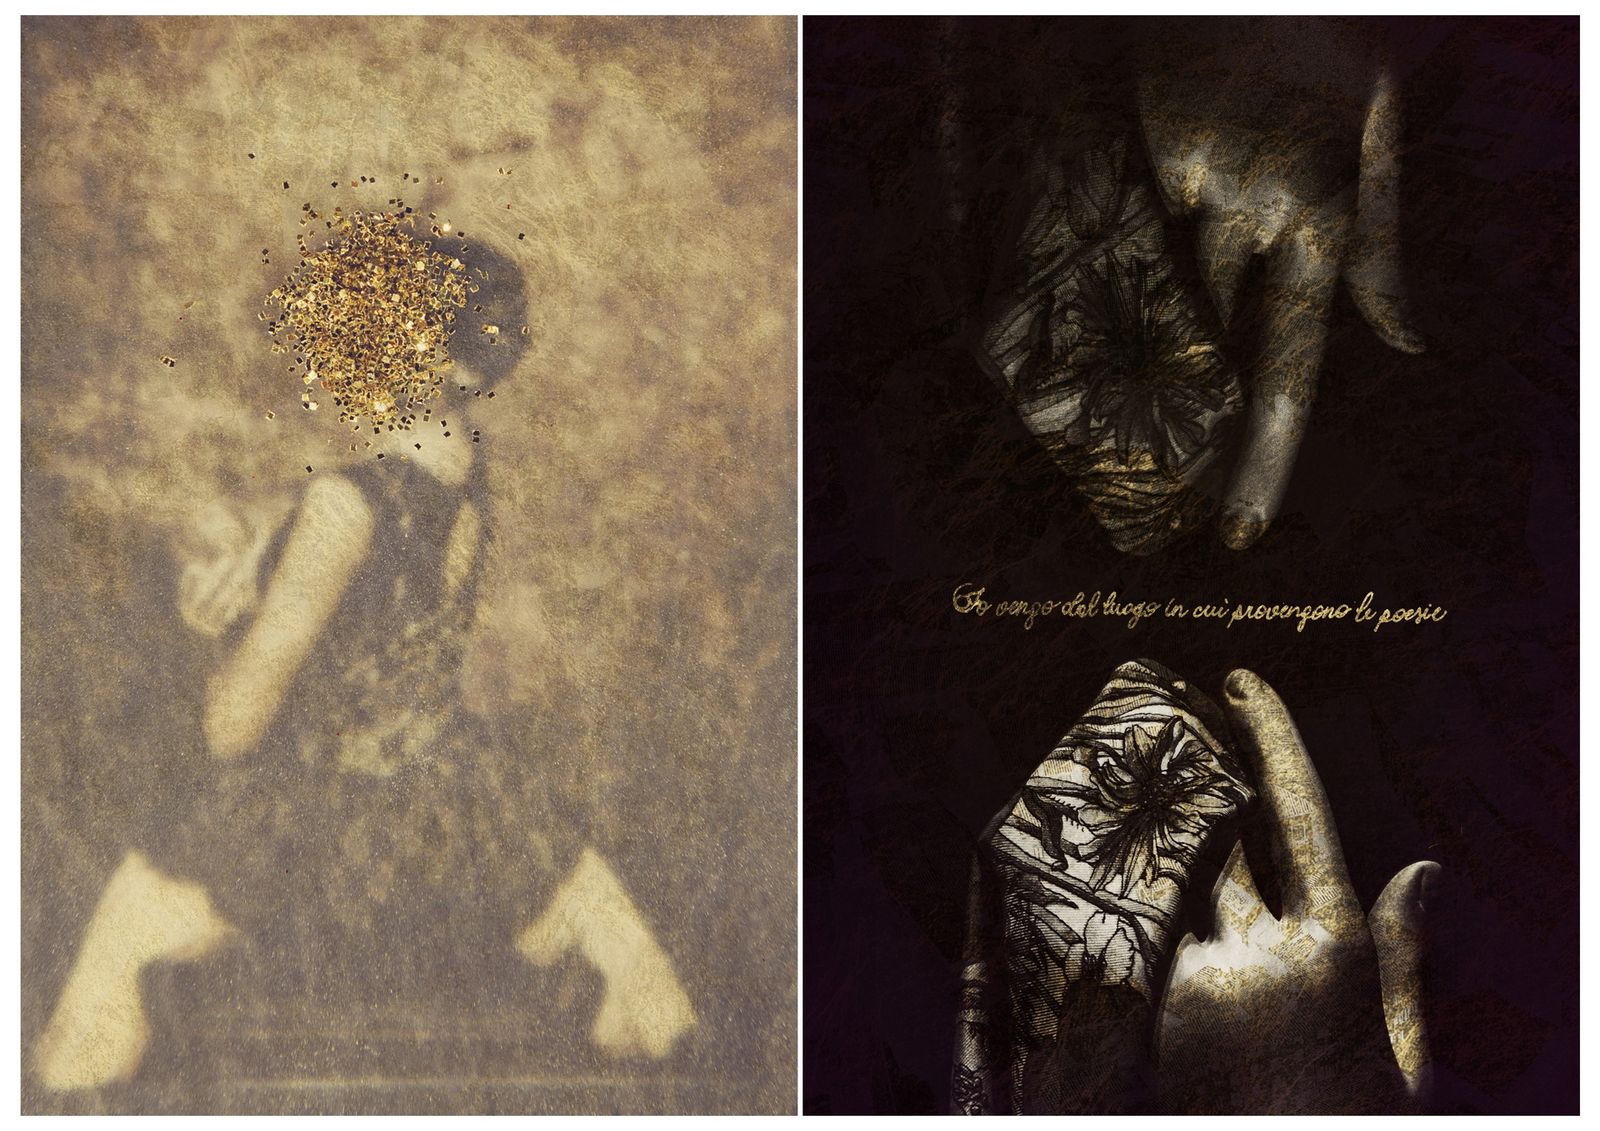 © Nicoletta Cerasomma - Image from the Tithe Muse photography project